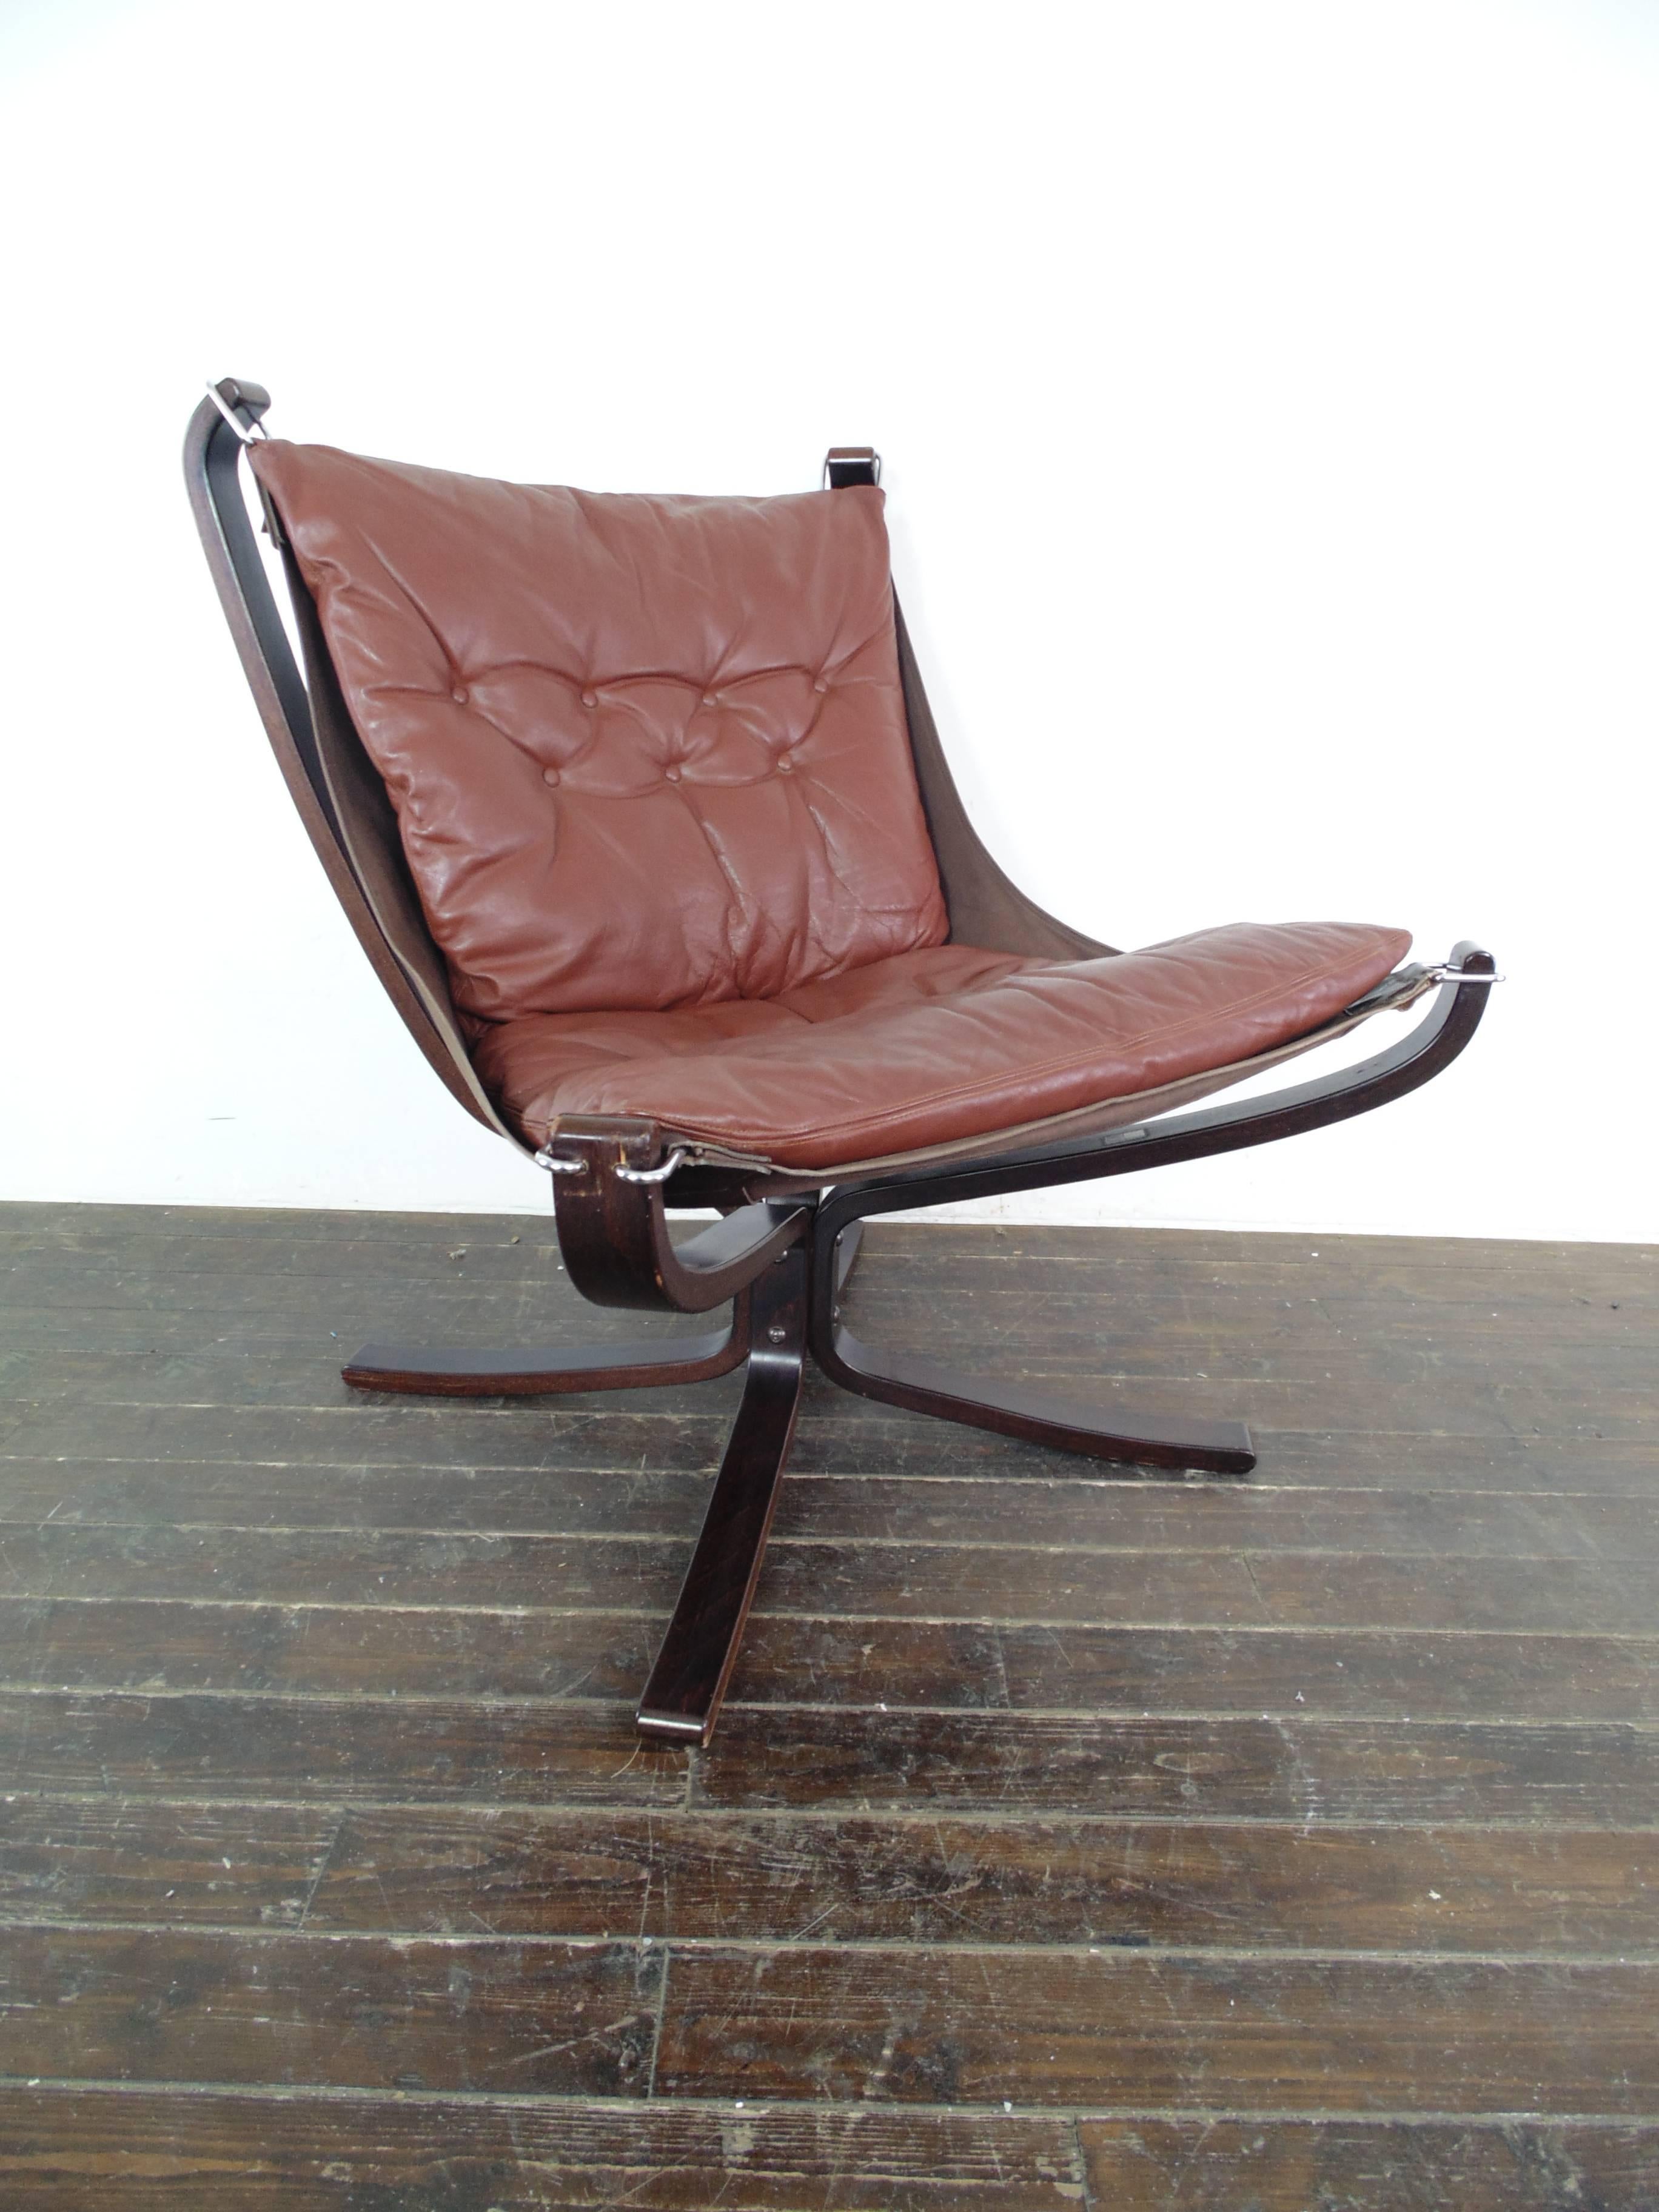 Lovely low back mid brown leather Falcon chair designed by the Norwegian designer, Sigurd Resell, in the 1970s. With rosewood base which is an X shape. 

In good vintage condition. The leather is in good condition for its age with no rips or tears